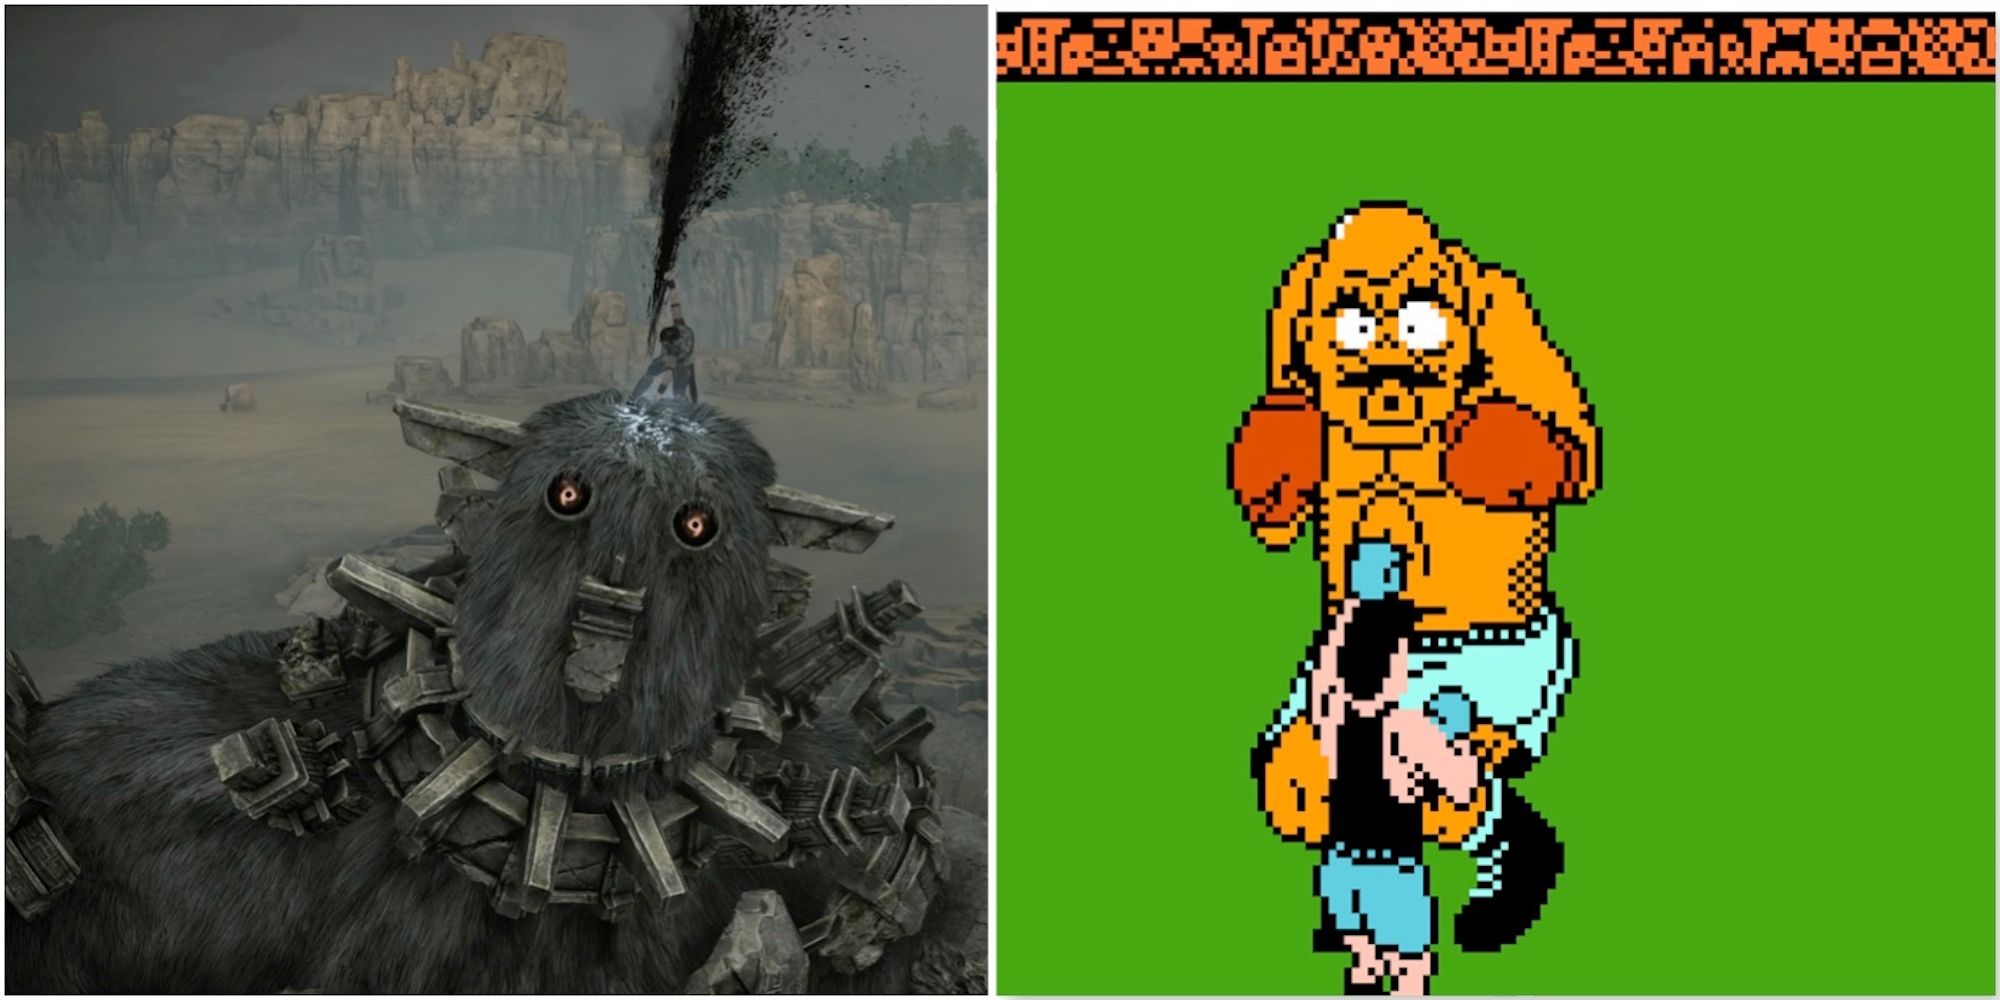 Fighting a boss in Shadow Of The Colossus and fighting Bald Bull in Punch-Out